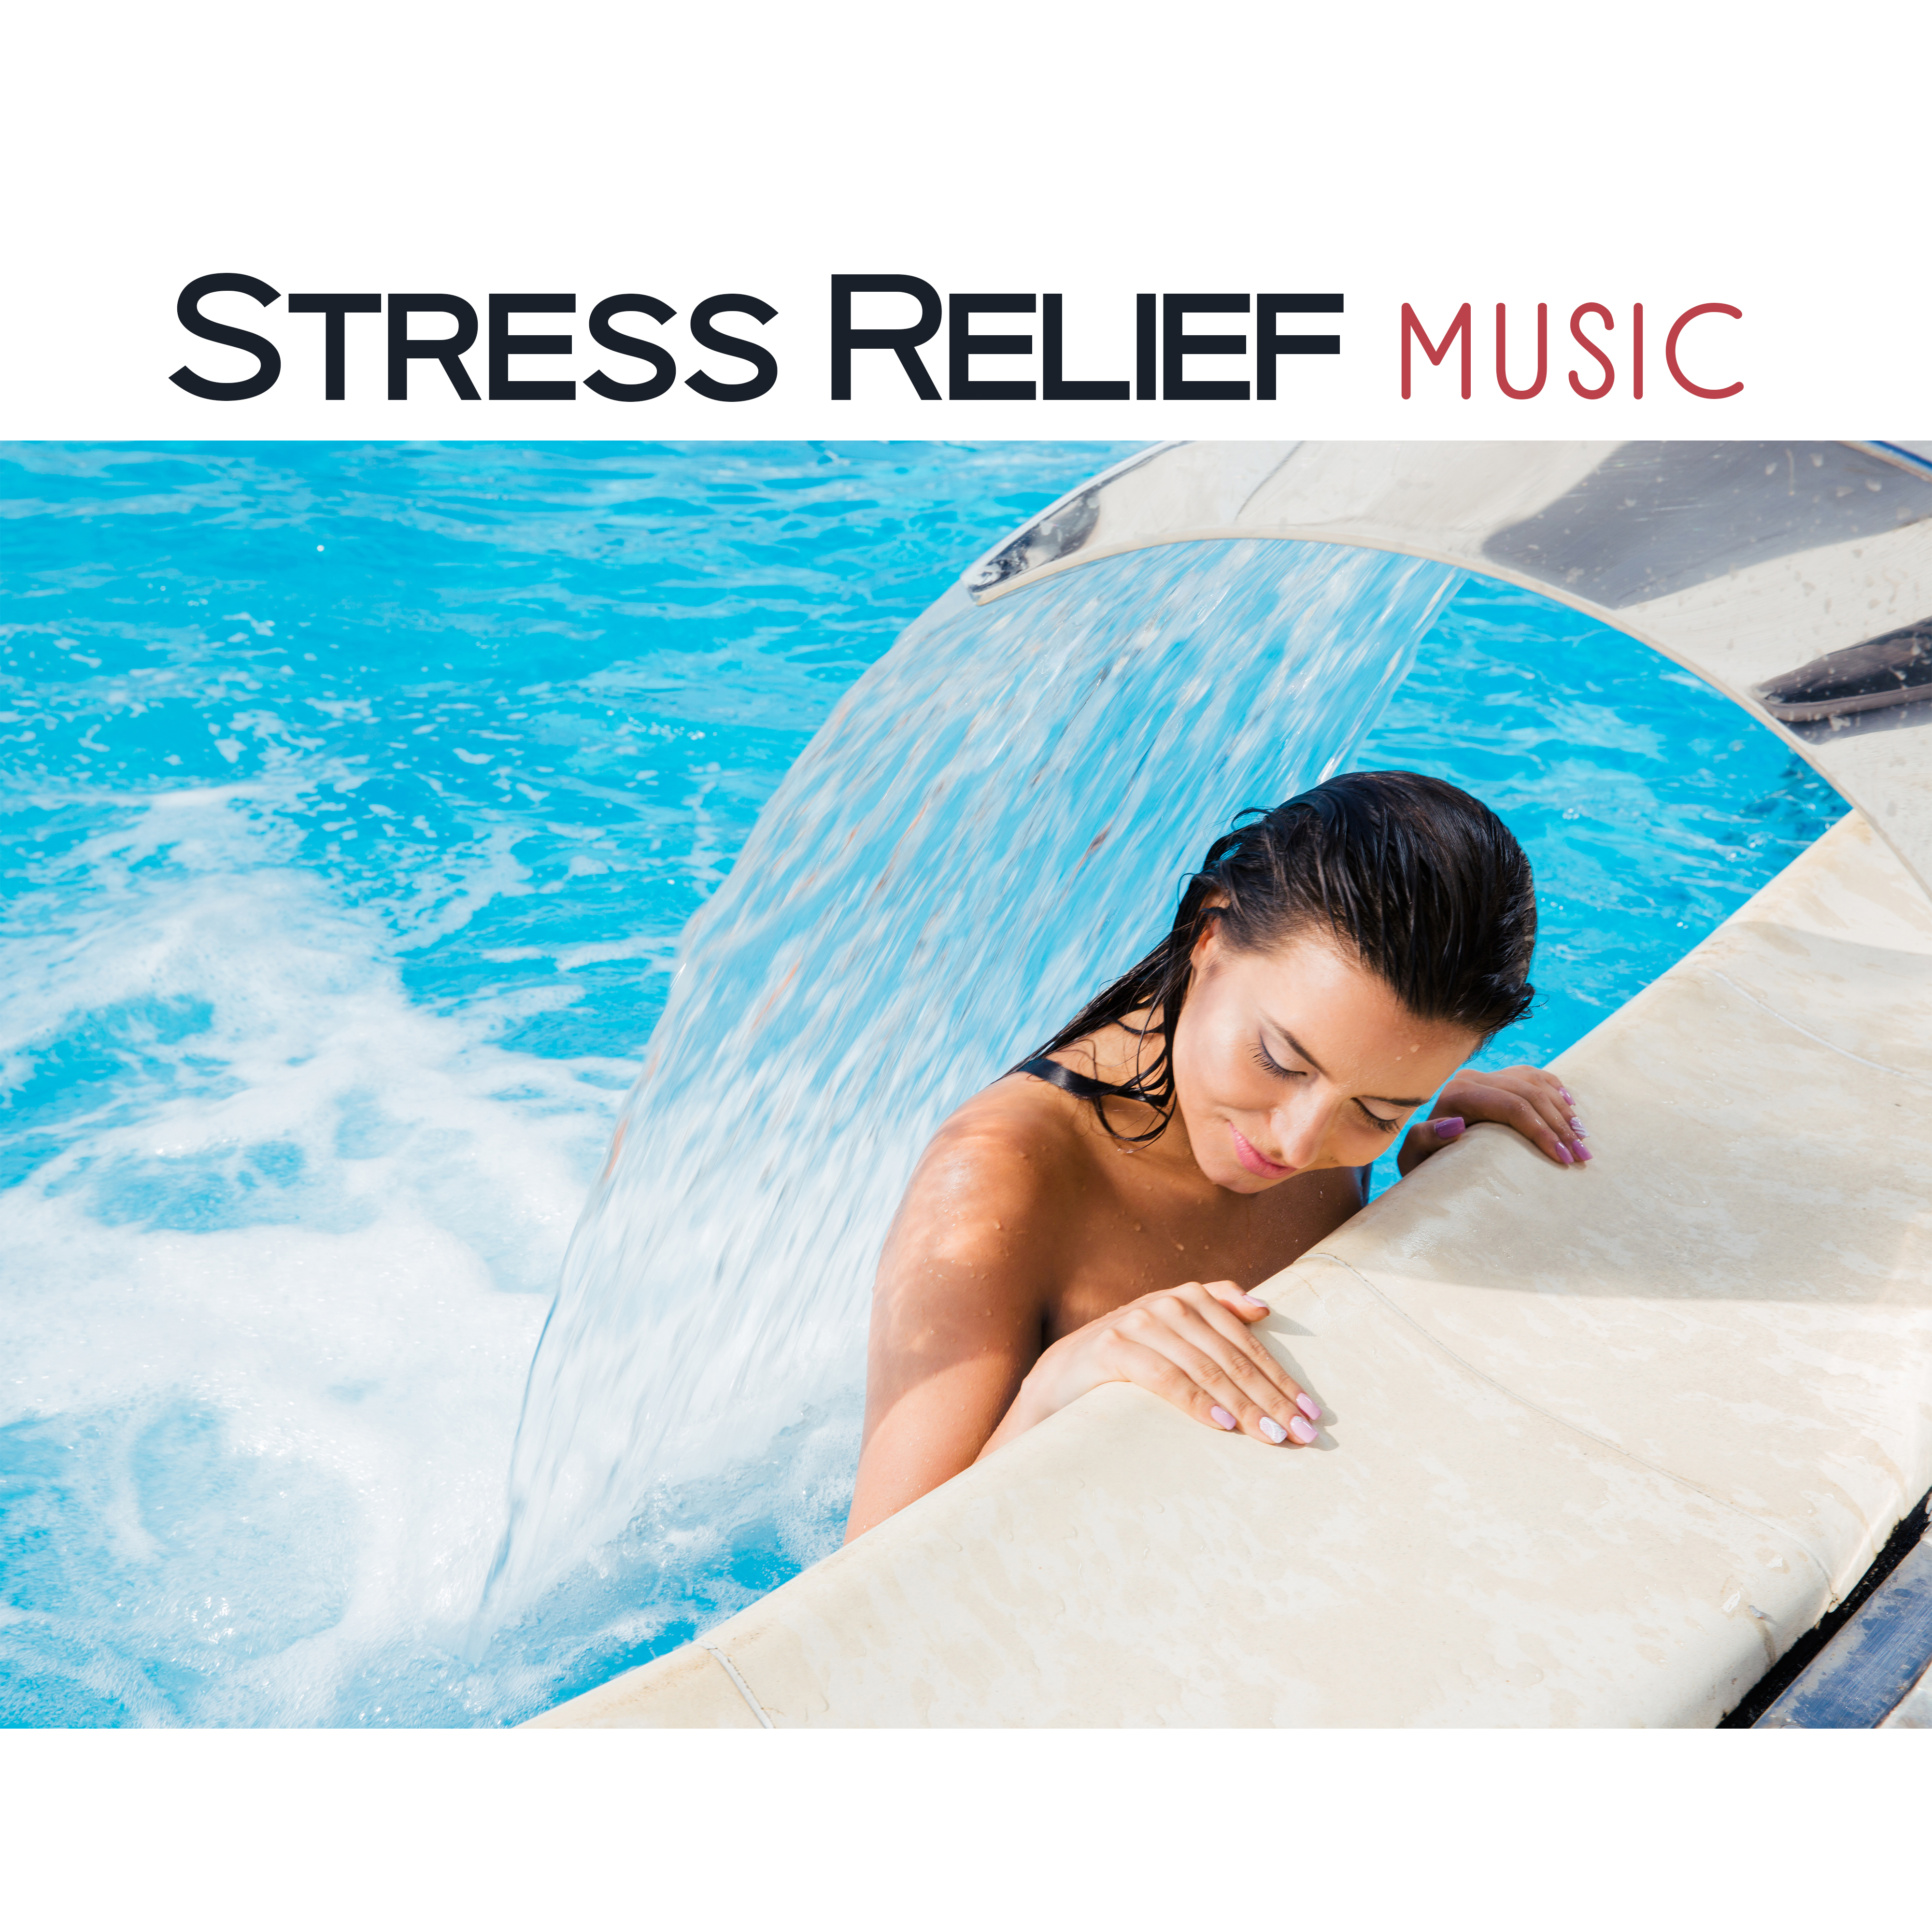 Stress Relief Music  Soothing Sounds for Spa, Massage, Relaxation Wellness, Peaceful Mind, Nature Sounds, Zen Garden, Calm Down, Pure Sleep